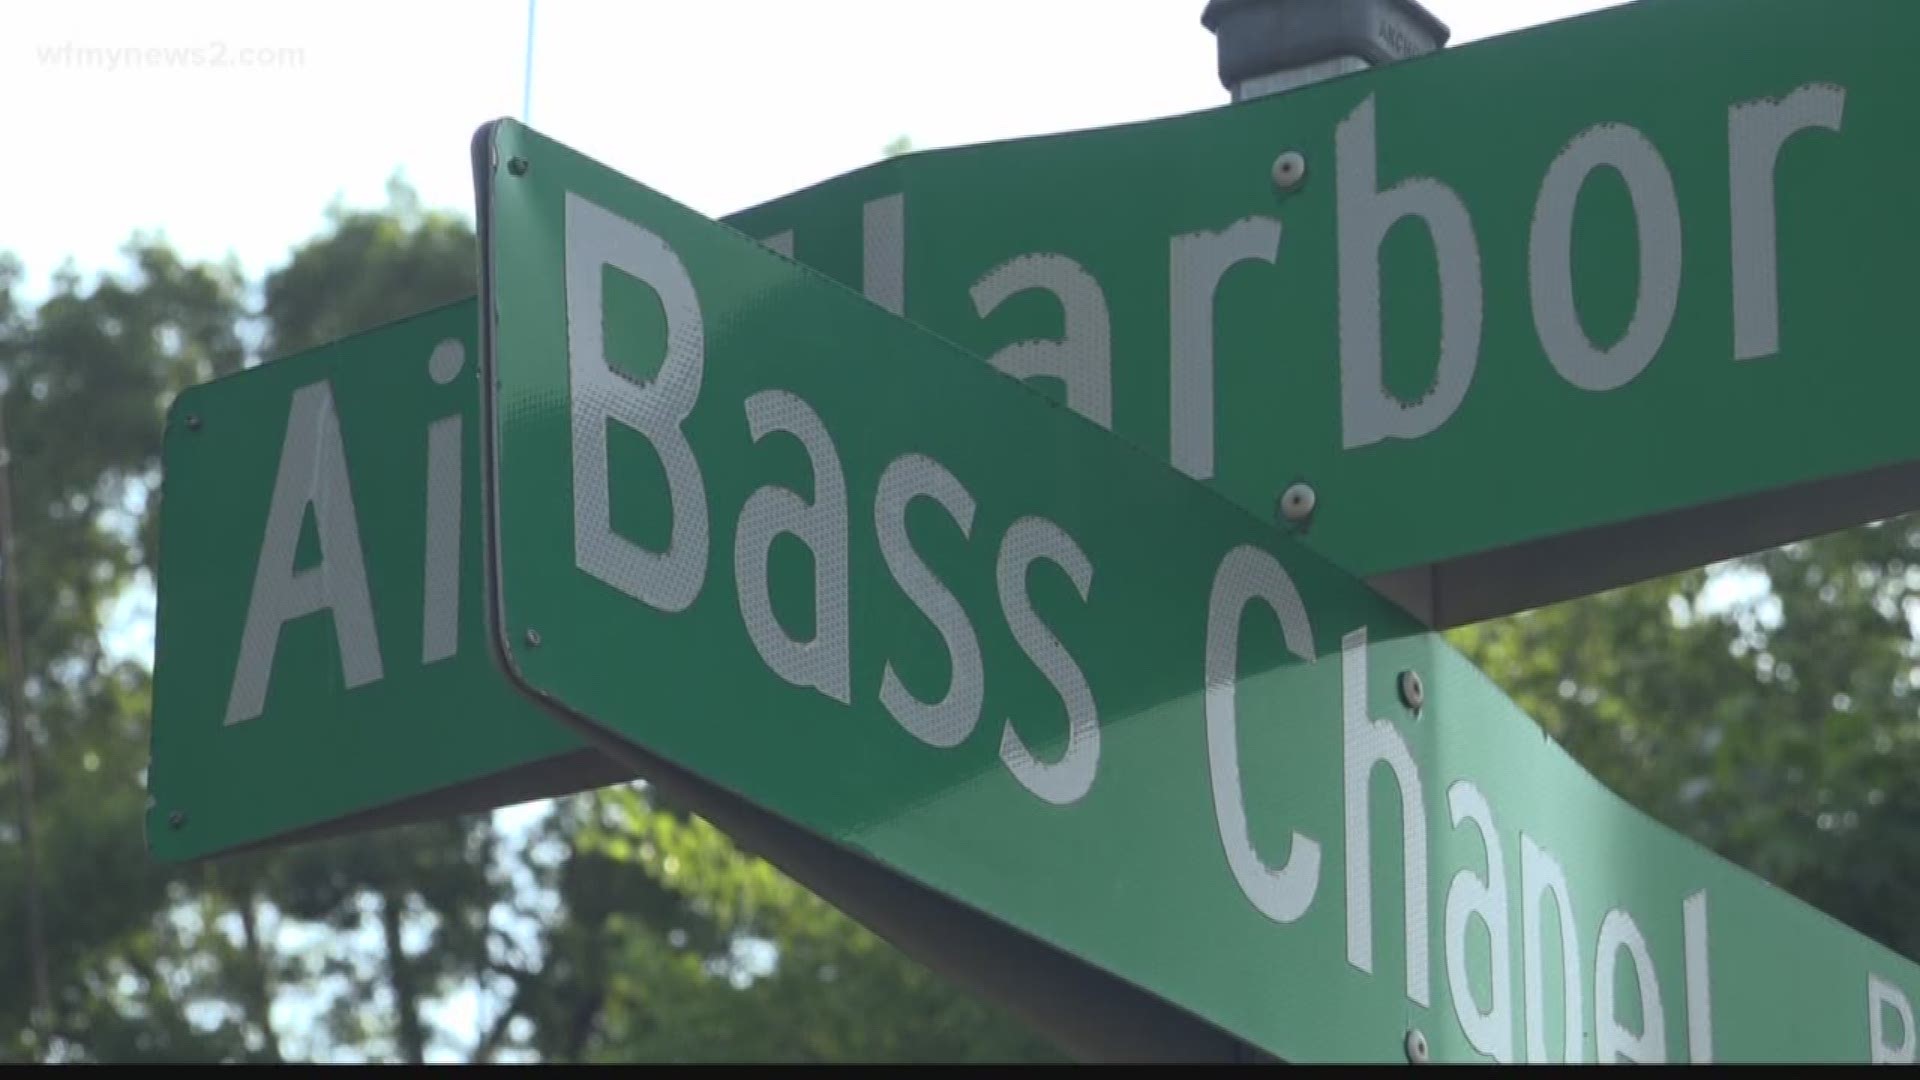 After another crash at the intersection of Bass Chapel and Air Harbor Roads in the Lake Jeanette area, neighbors want the NCDOT to make it safer for drivers.